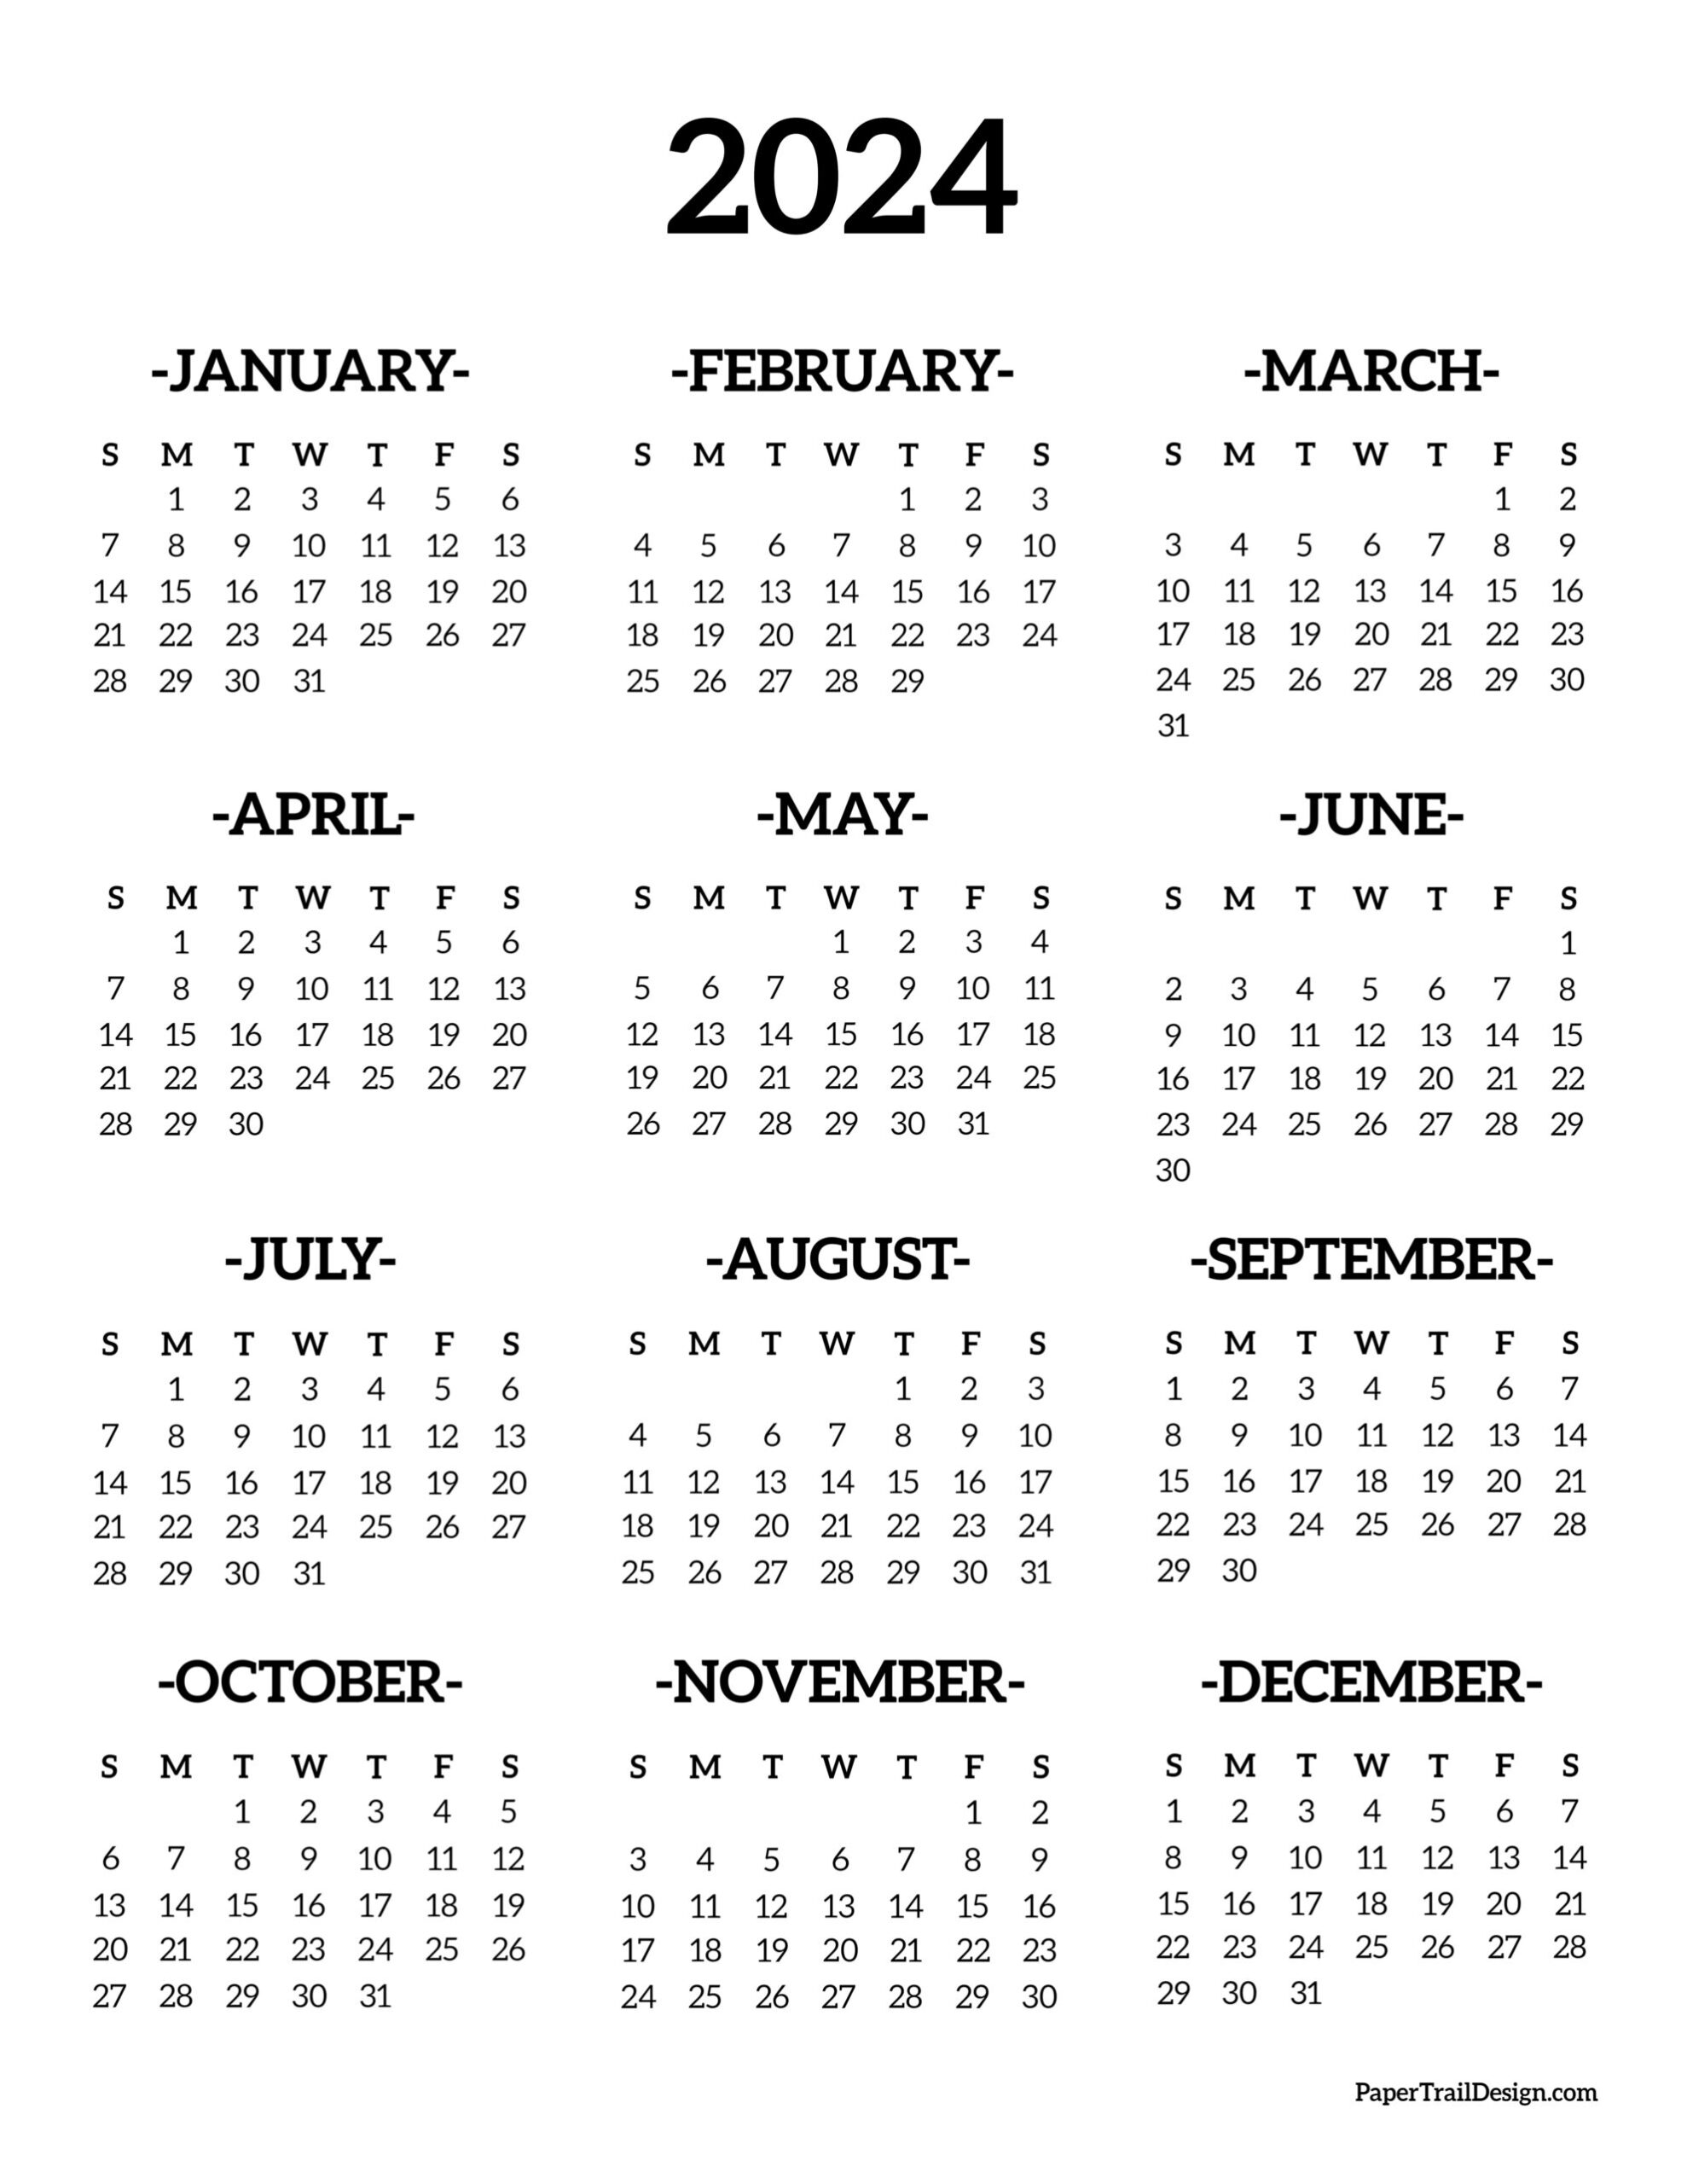 Calendar 2024 Printable One Page - Paper Trail Design for 2024 Printable Monthly Calendar One Page